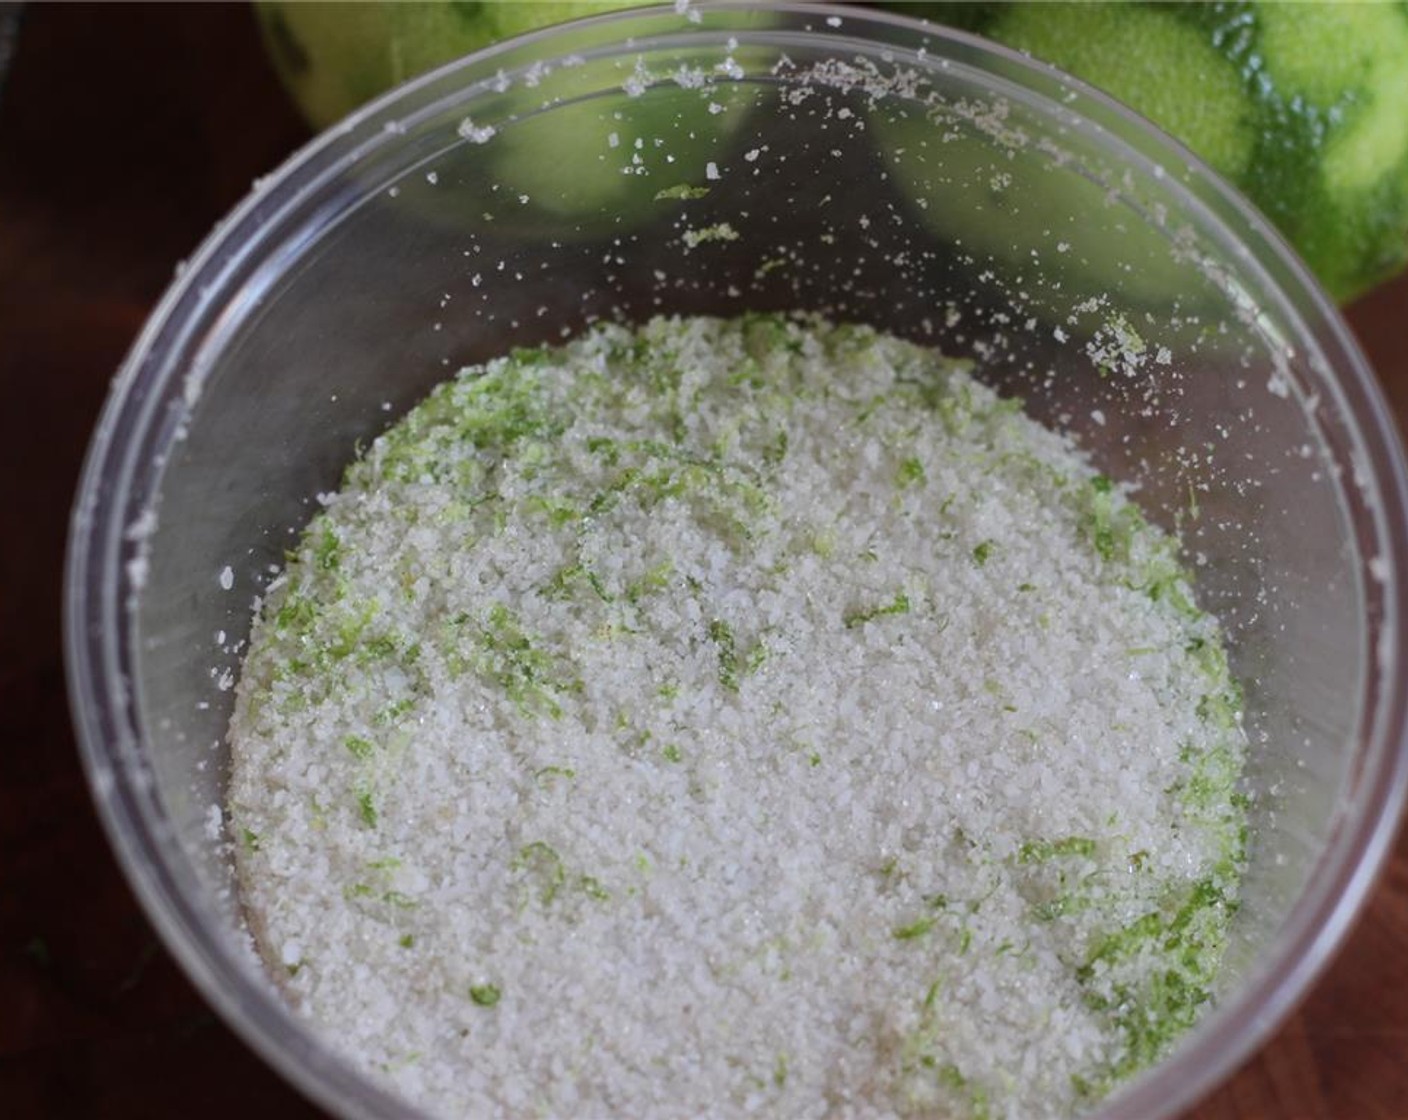 step 3 For the curing mixture, combine the Kosher Salt (1/2 cup), Granulated Sugar (1/4 cup), and lime zest in a medium bowl. Mix well.